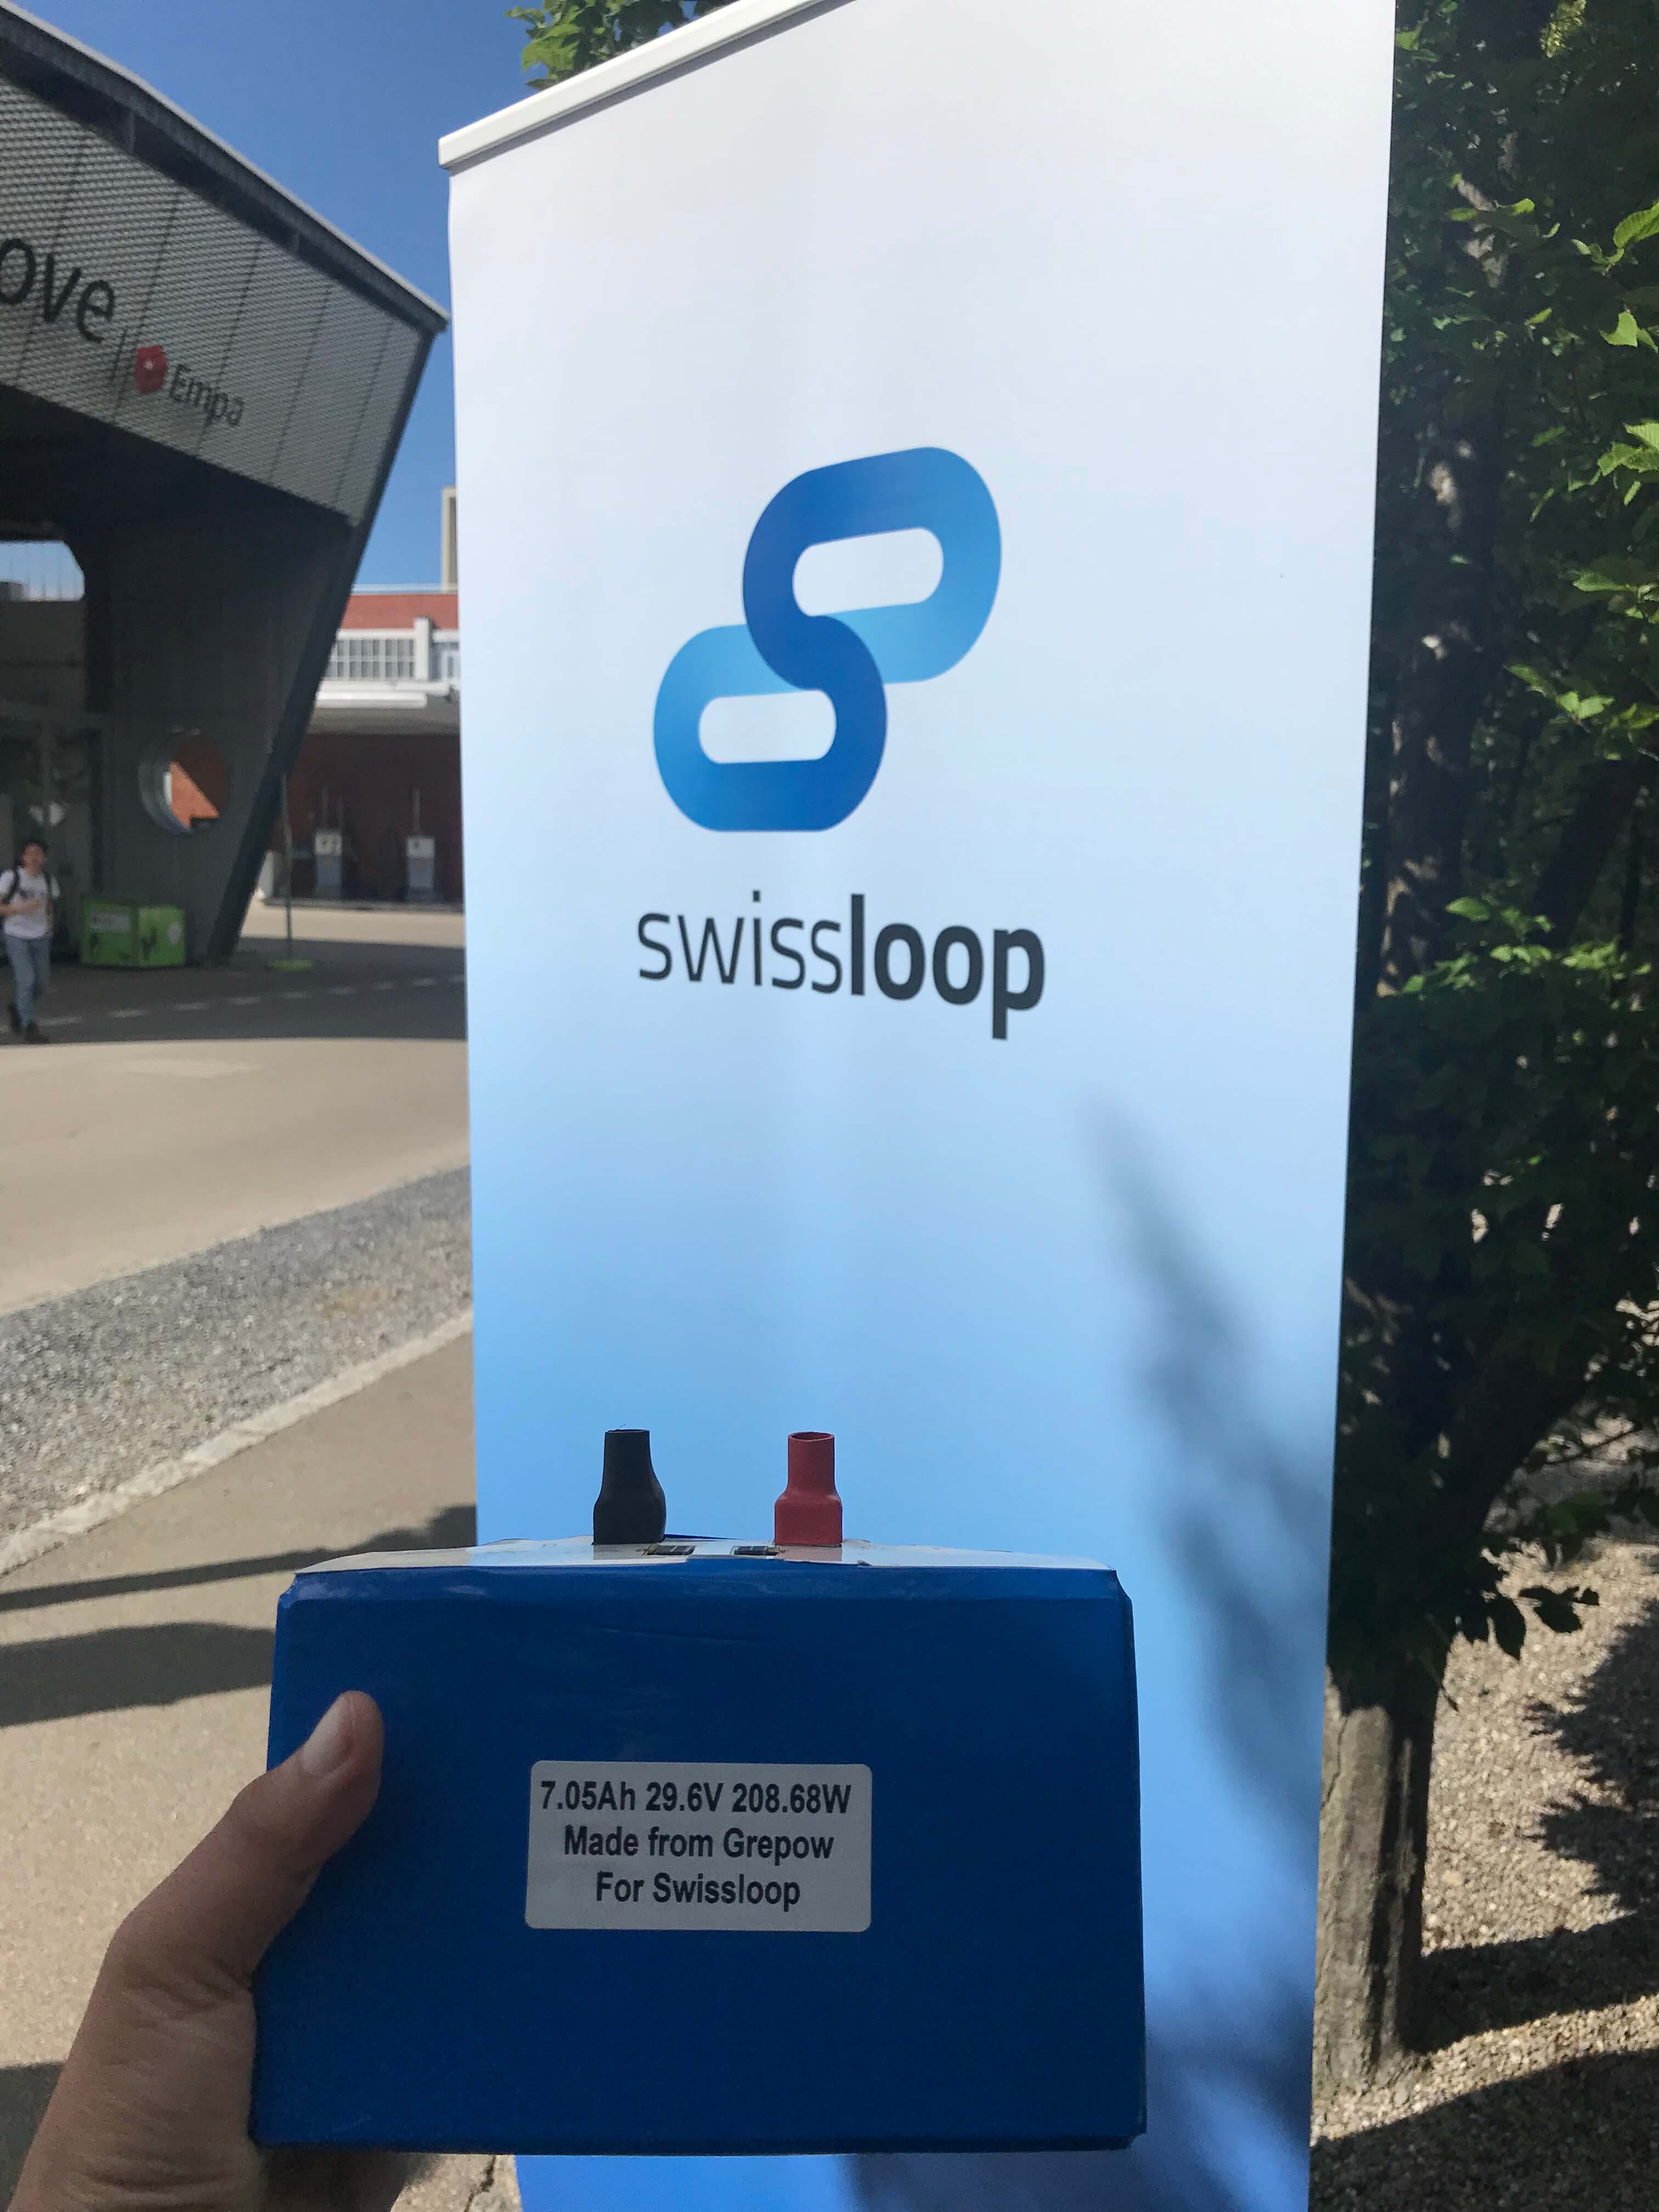 The Swissloop team and Grepow high C-rate batteries